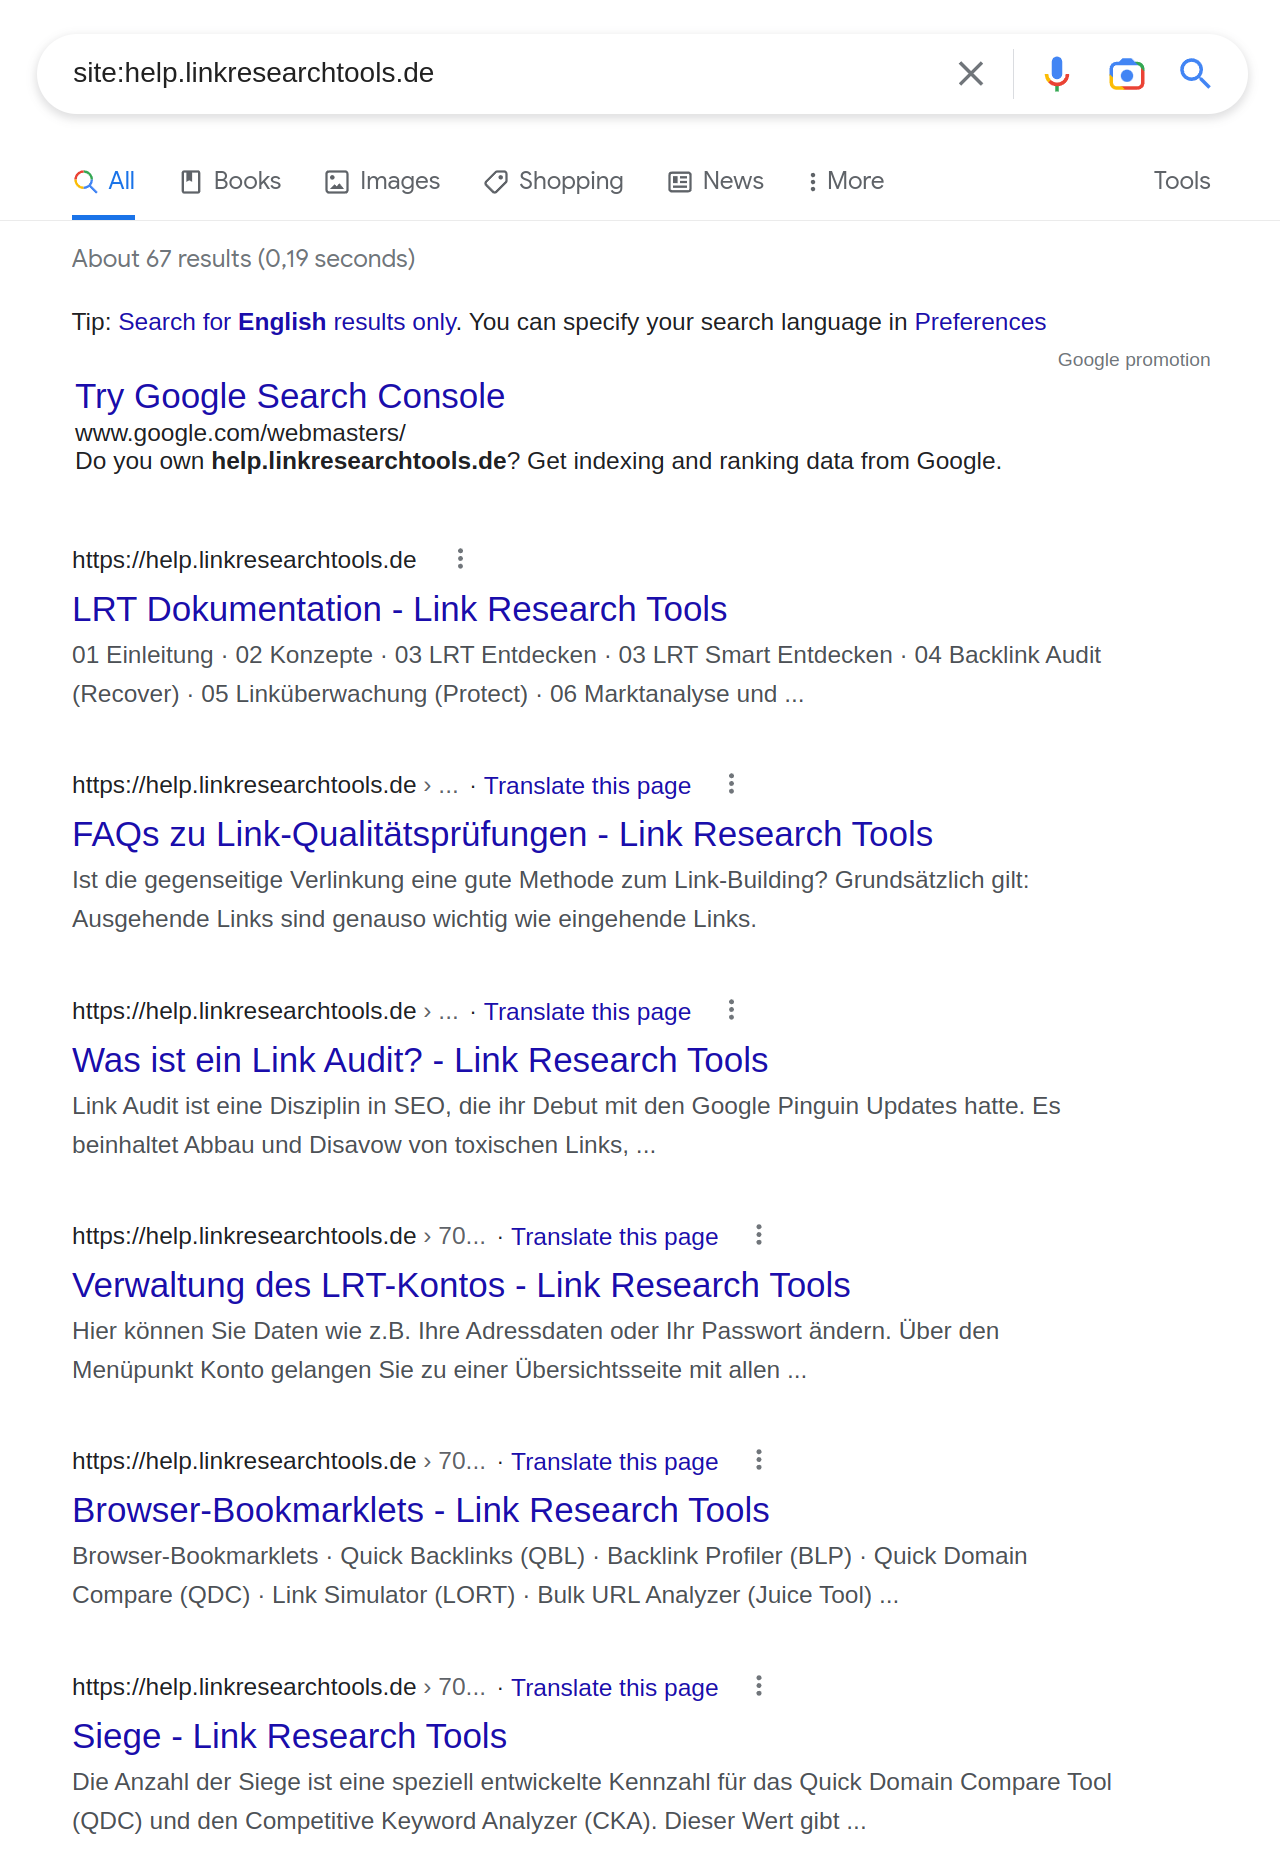 results of the search for site:help.linkresearchtools.de on Nov 28 2022